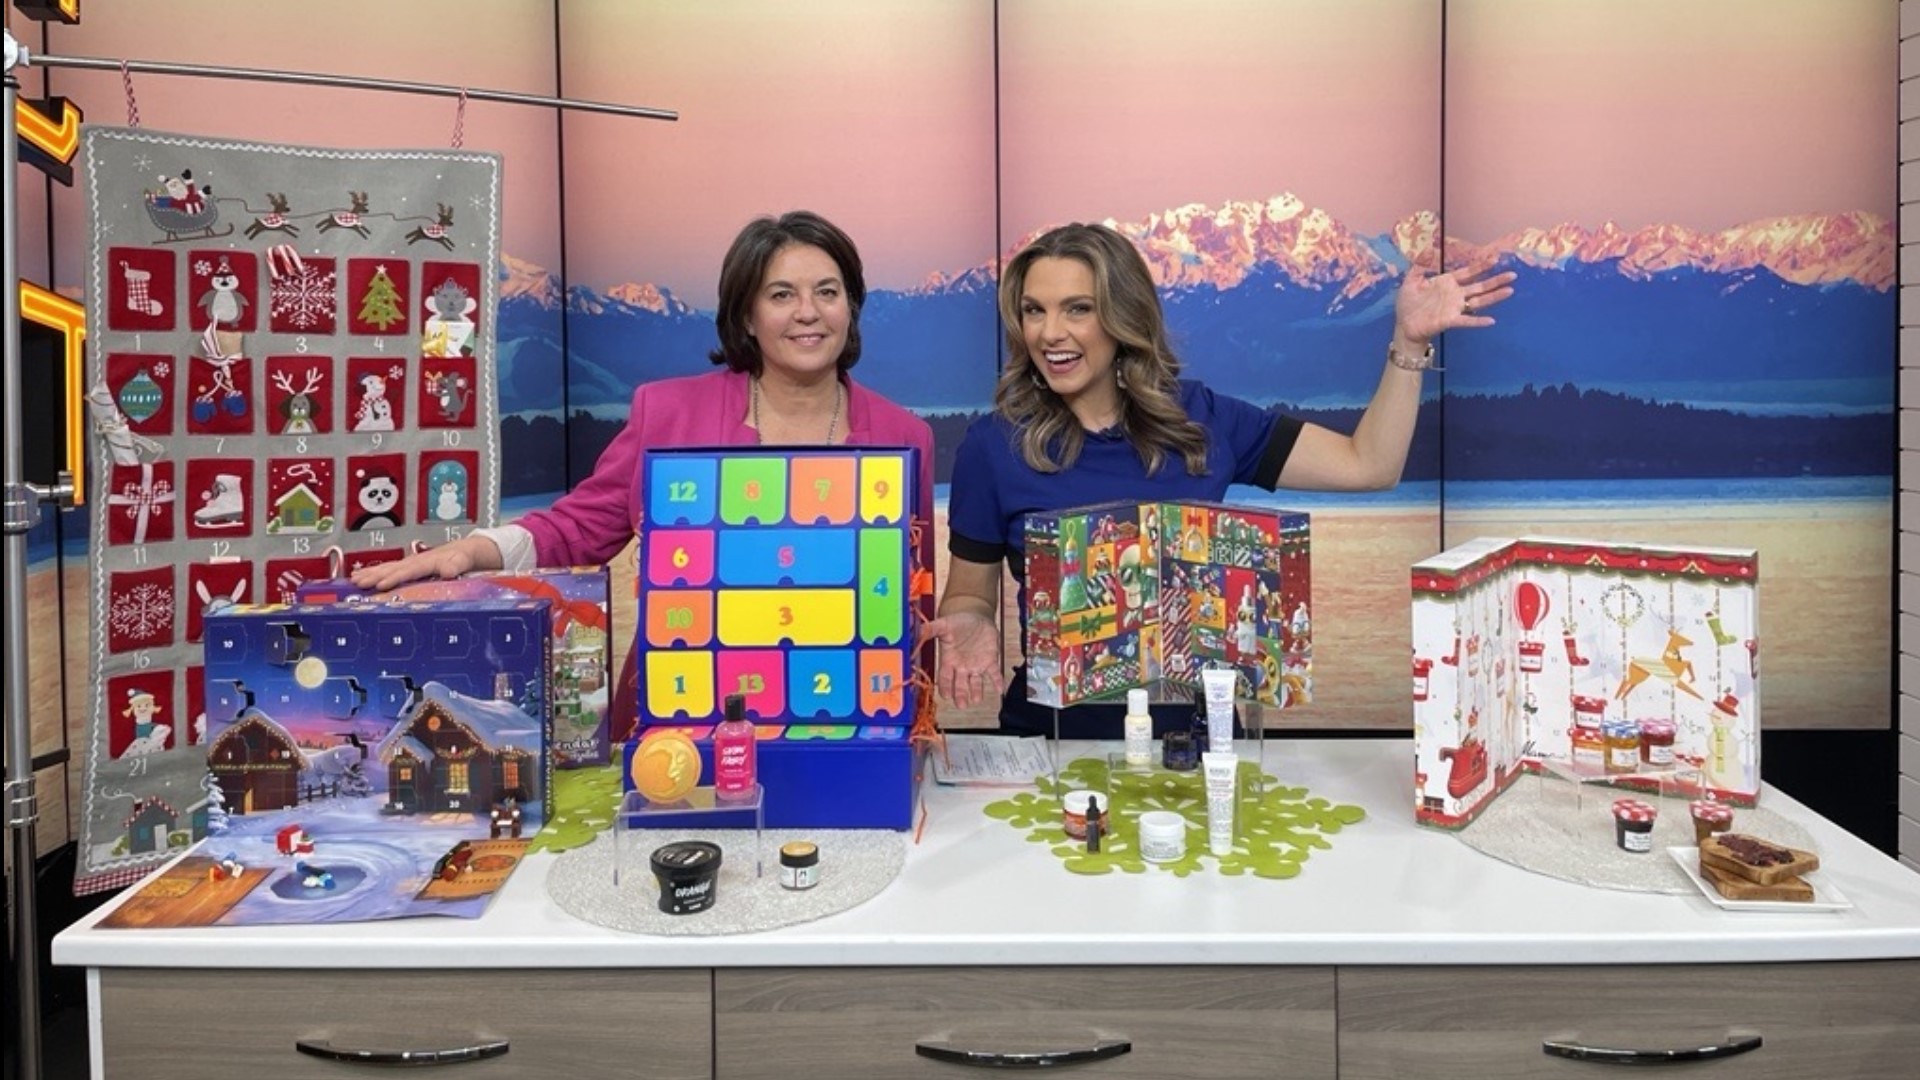 From a spa experience to skincare, wine and French preserves — plus a few for the kiddos! These are the calendars we love this year. #newdaynw